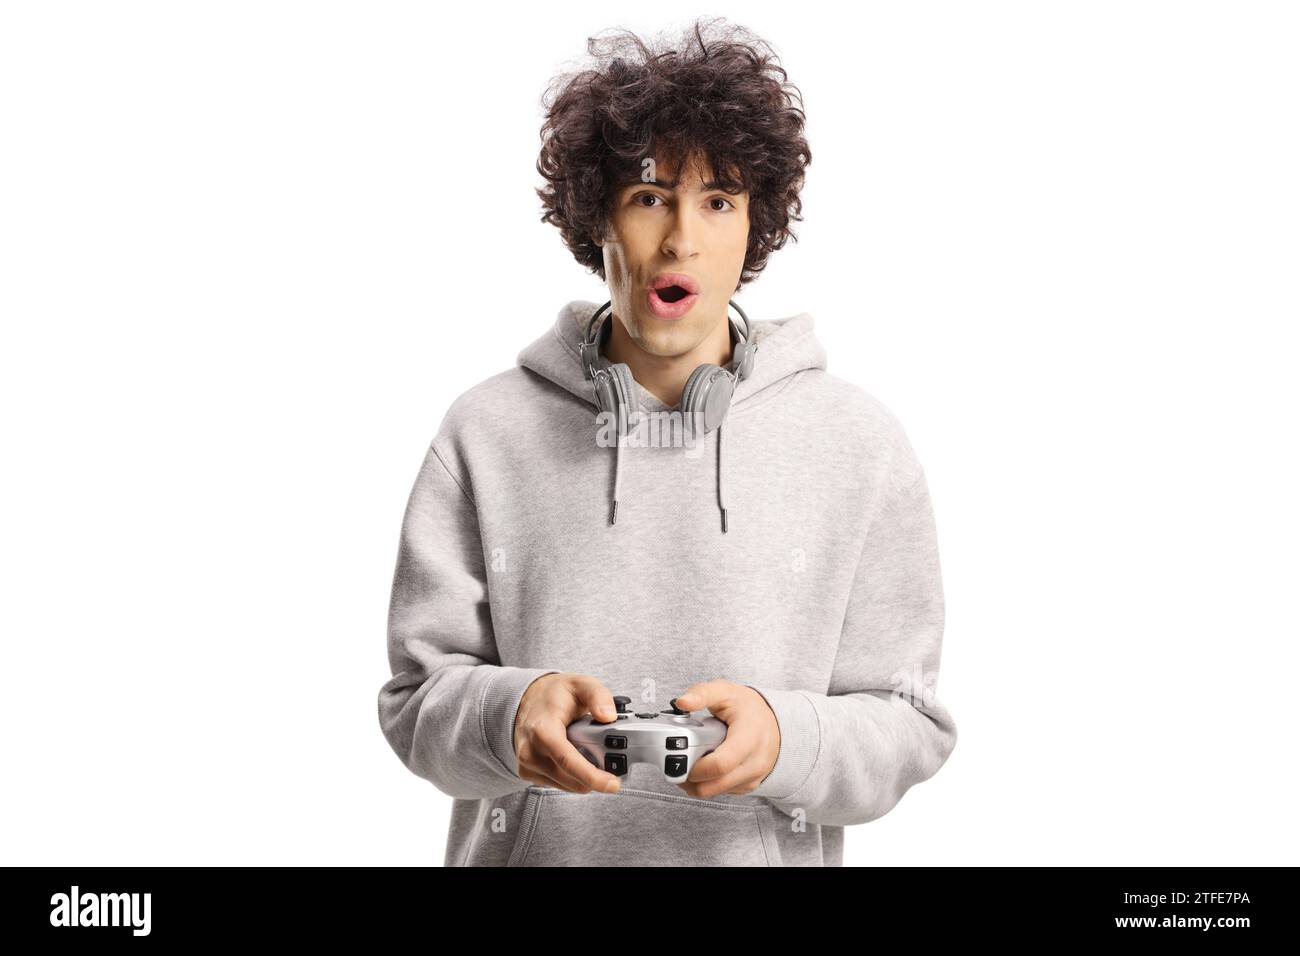 Excited young man playing a video game with joystick isolated on white background Stock Photo